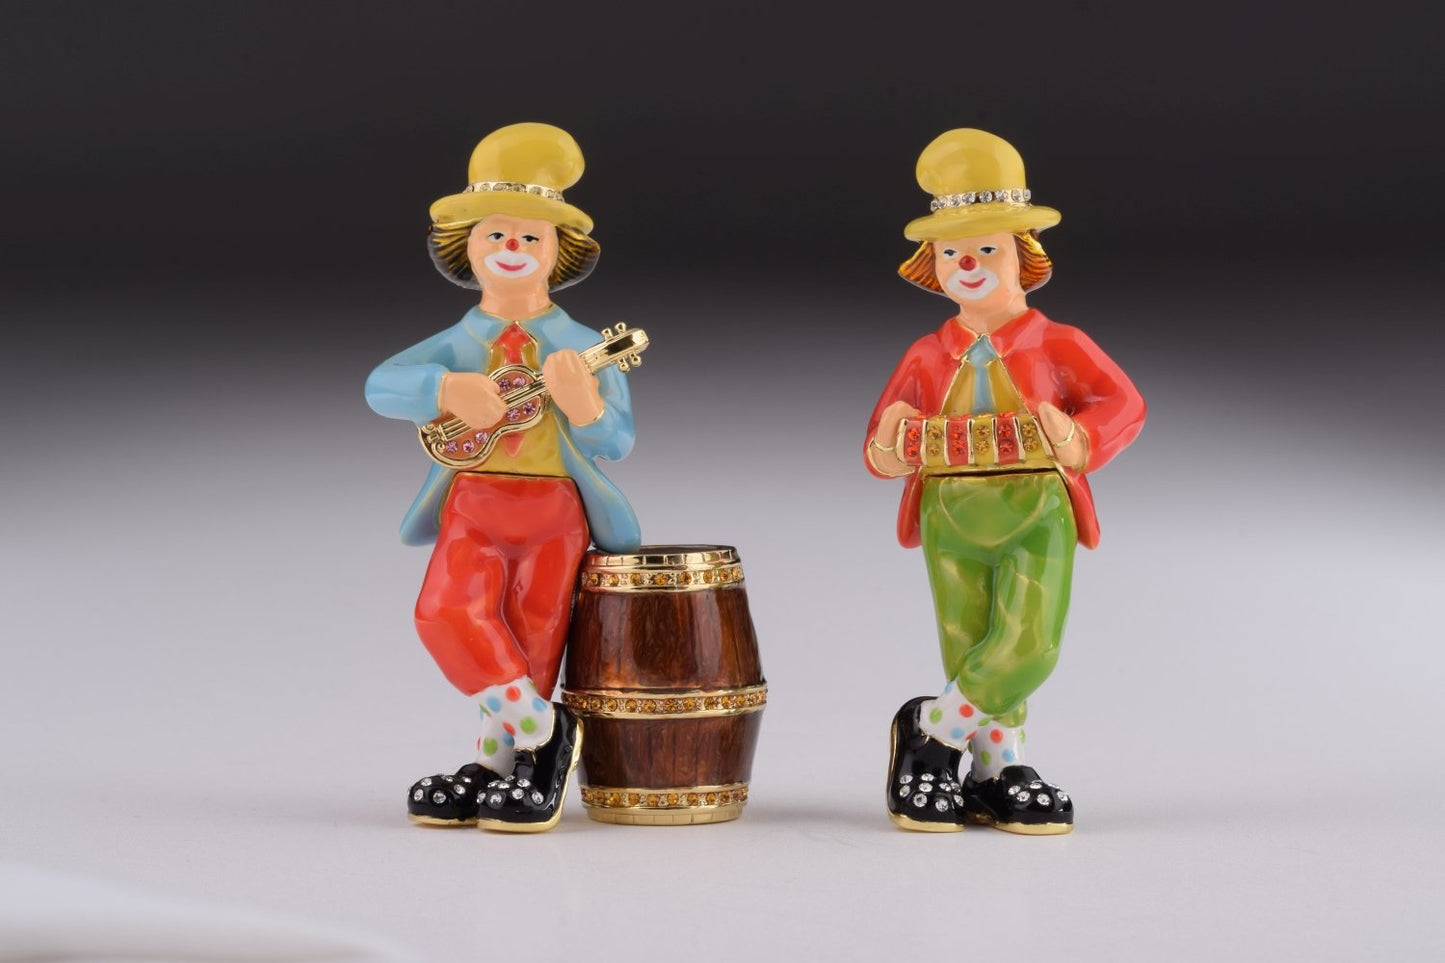 Two Circus Clowns Playing Music